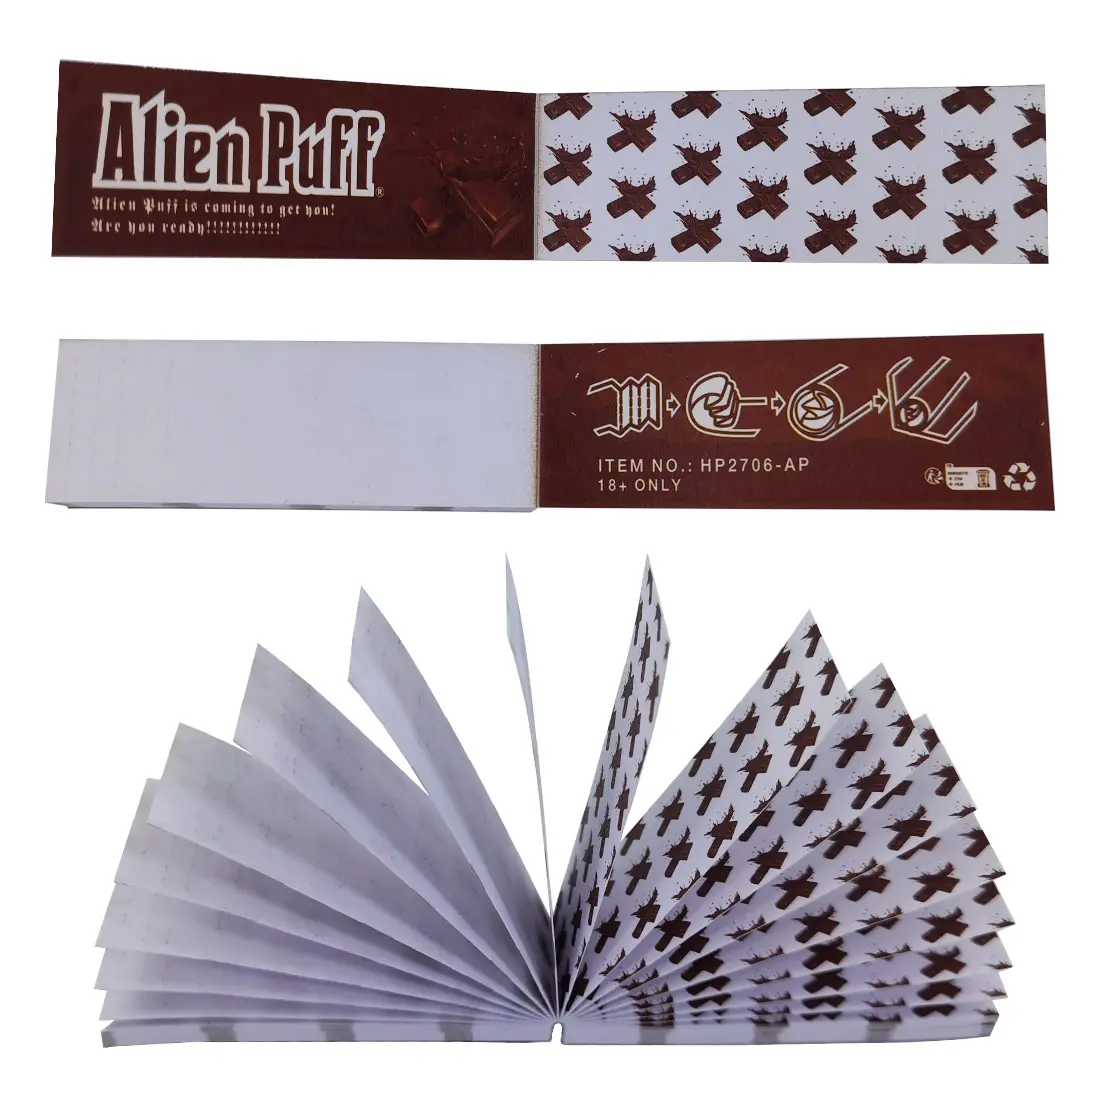 Alien Puff 60x20mm Perforated Chocolate Flavor Smoking Filter Tips 25 Booklets per Box 50 Tips per Booklets Wholesale OEM Custom